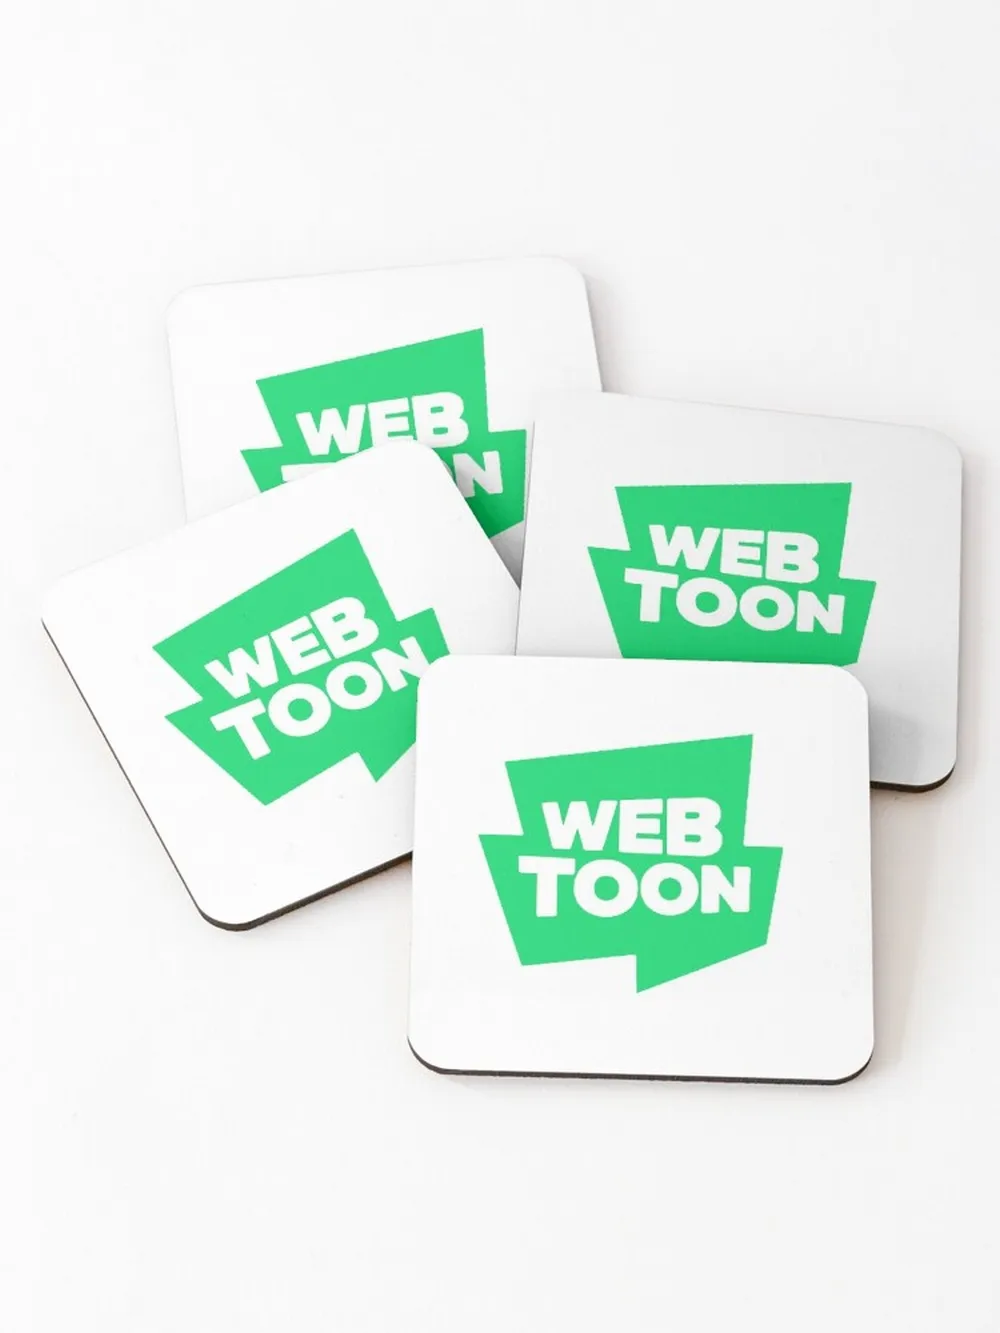 How To Use Webtoon Promotion Codes To Get Free Comics